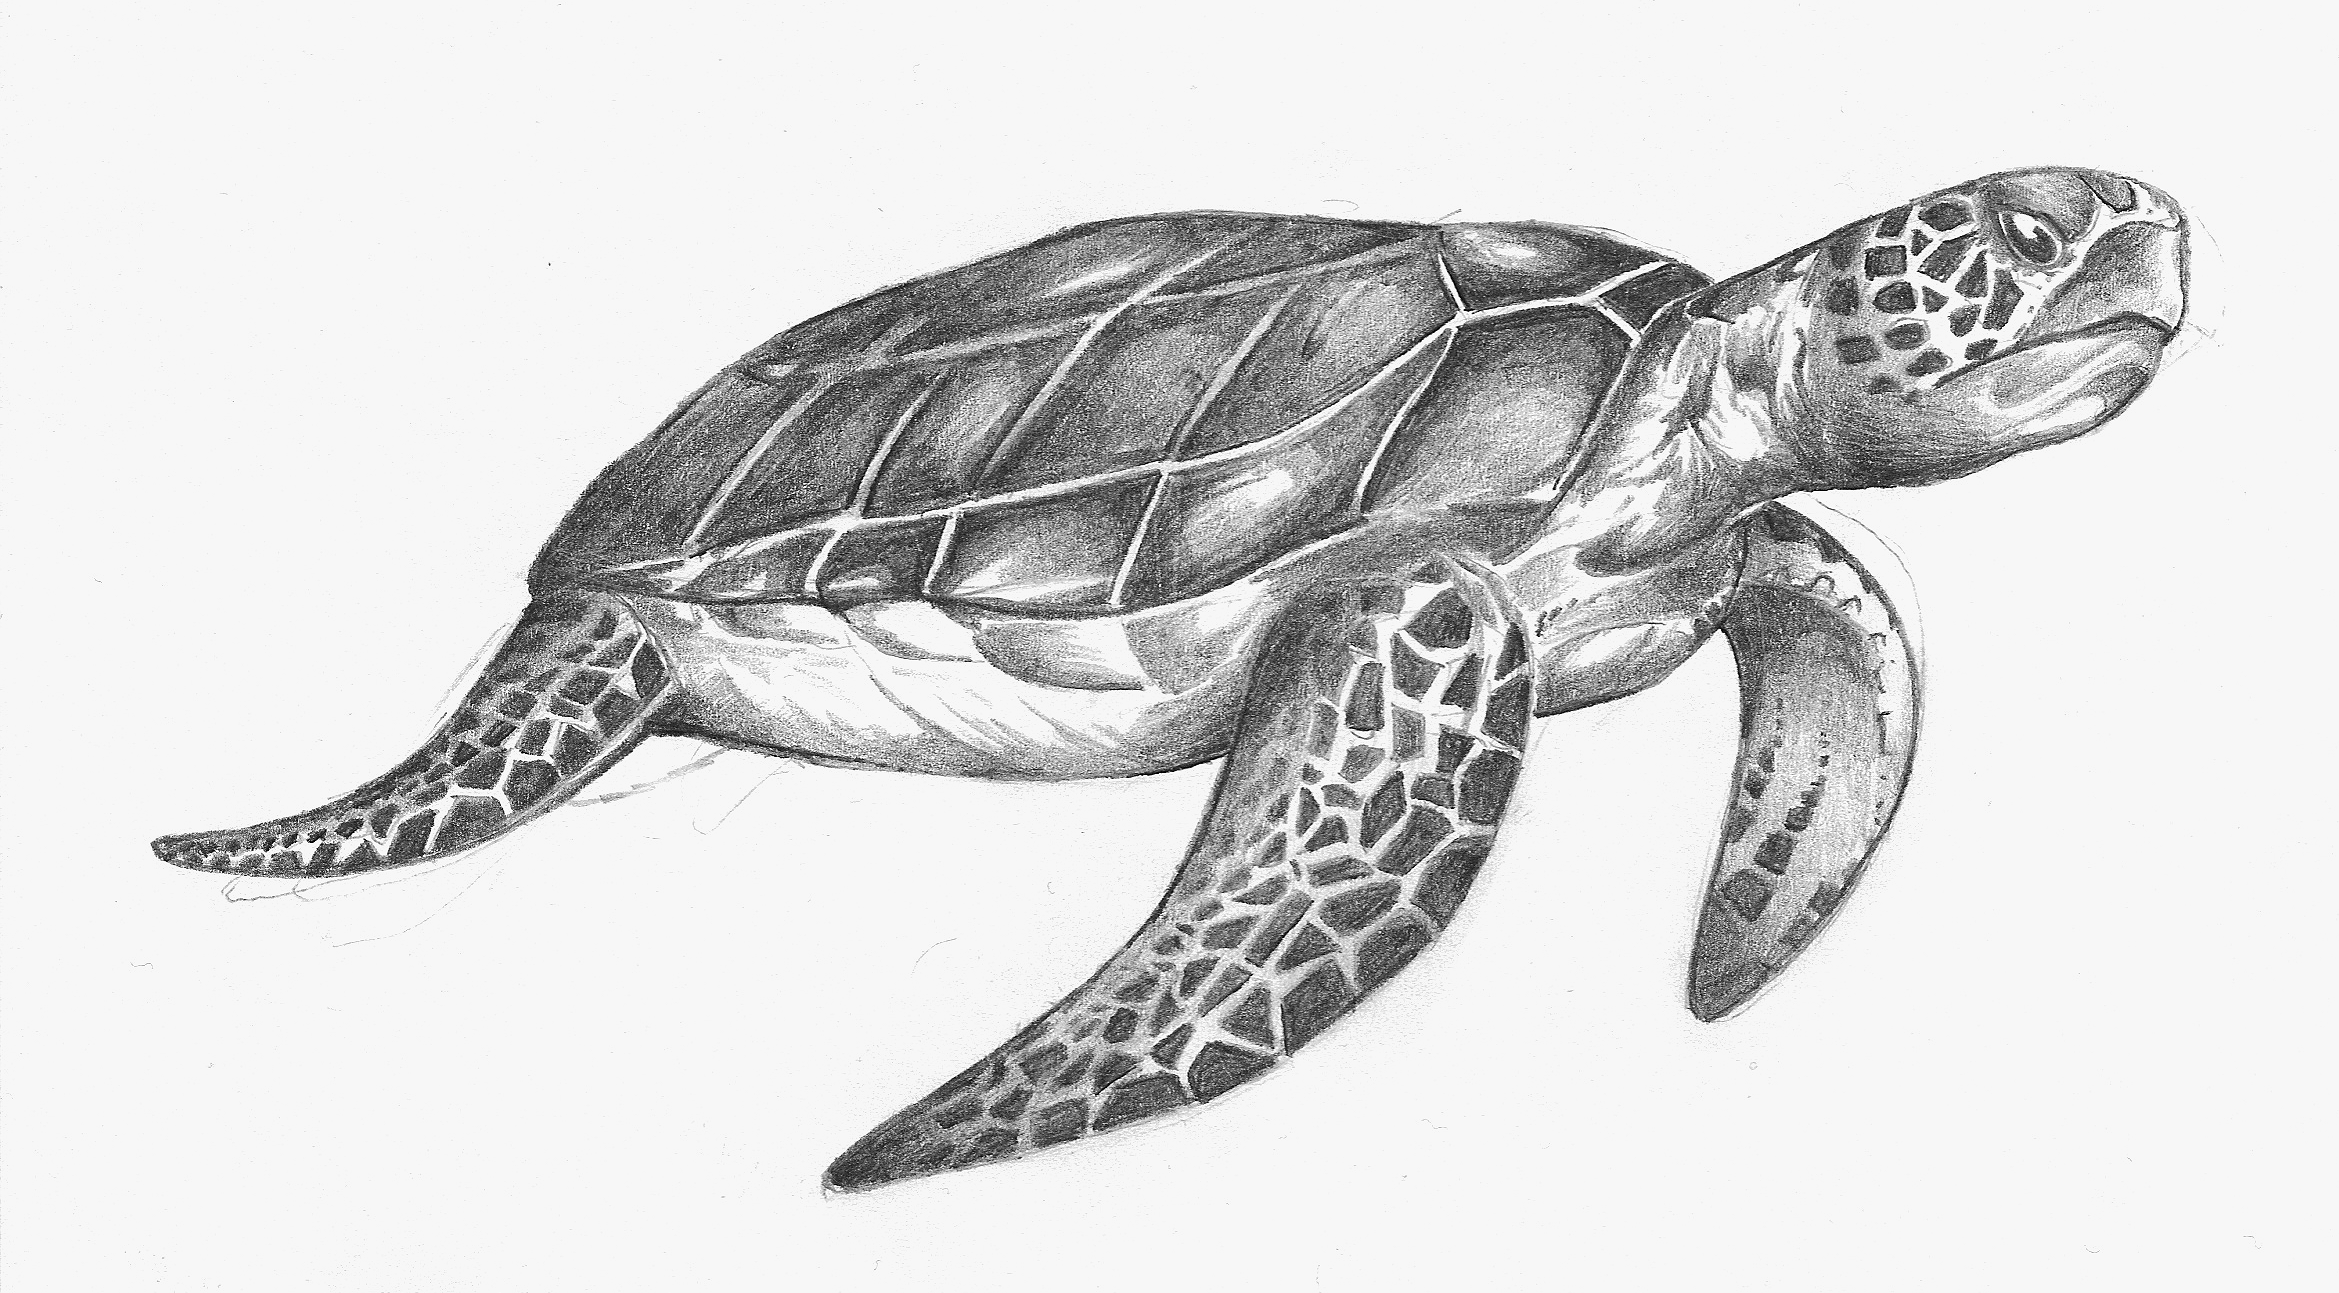 Sea Tortoise: Over 25,675 Royalty-Free Licensable Stock Illustrations &  Drawings | Shutterstock